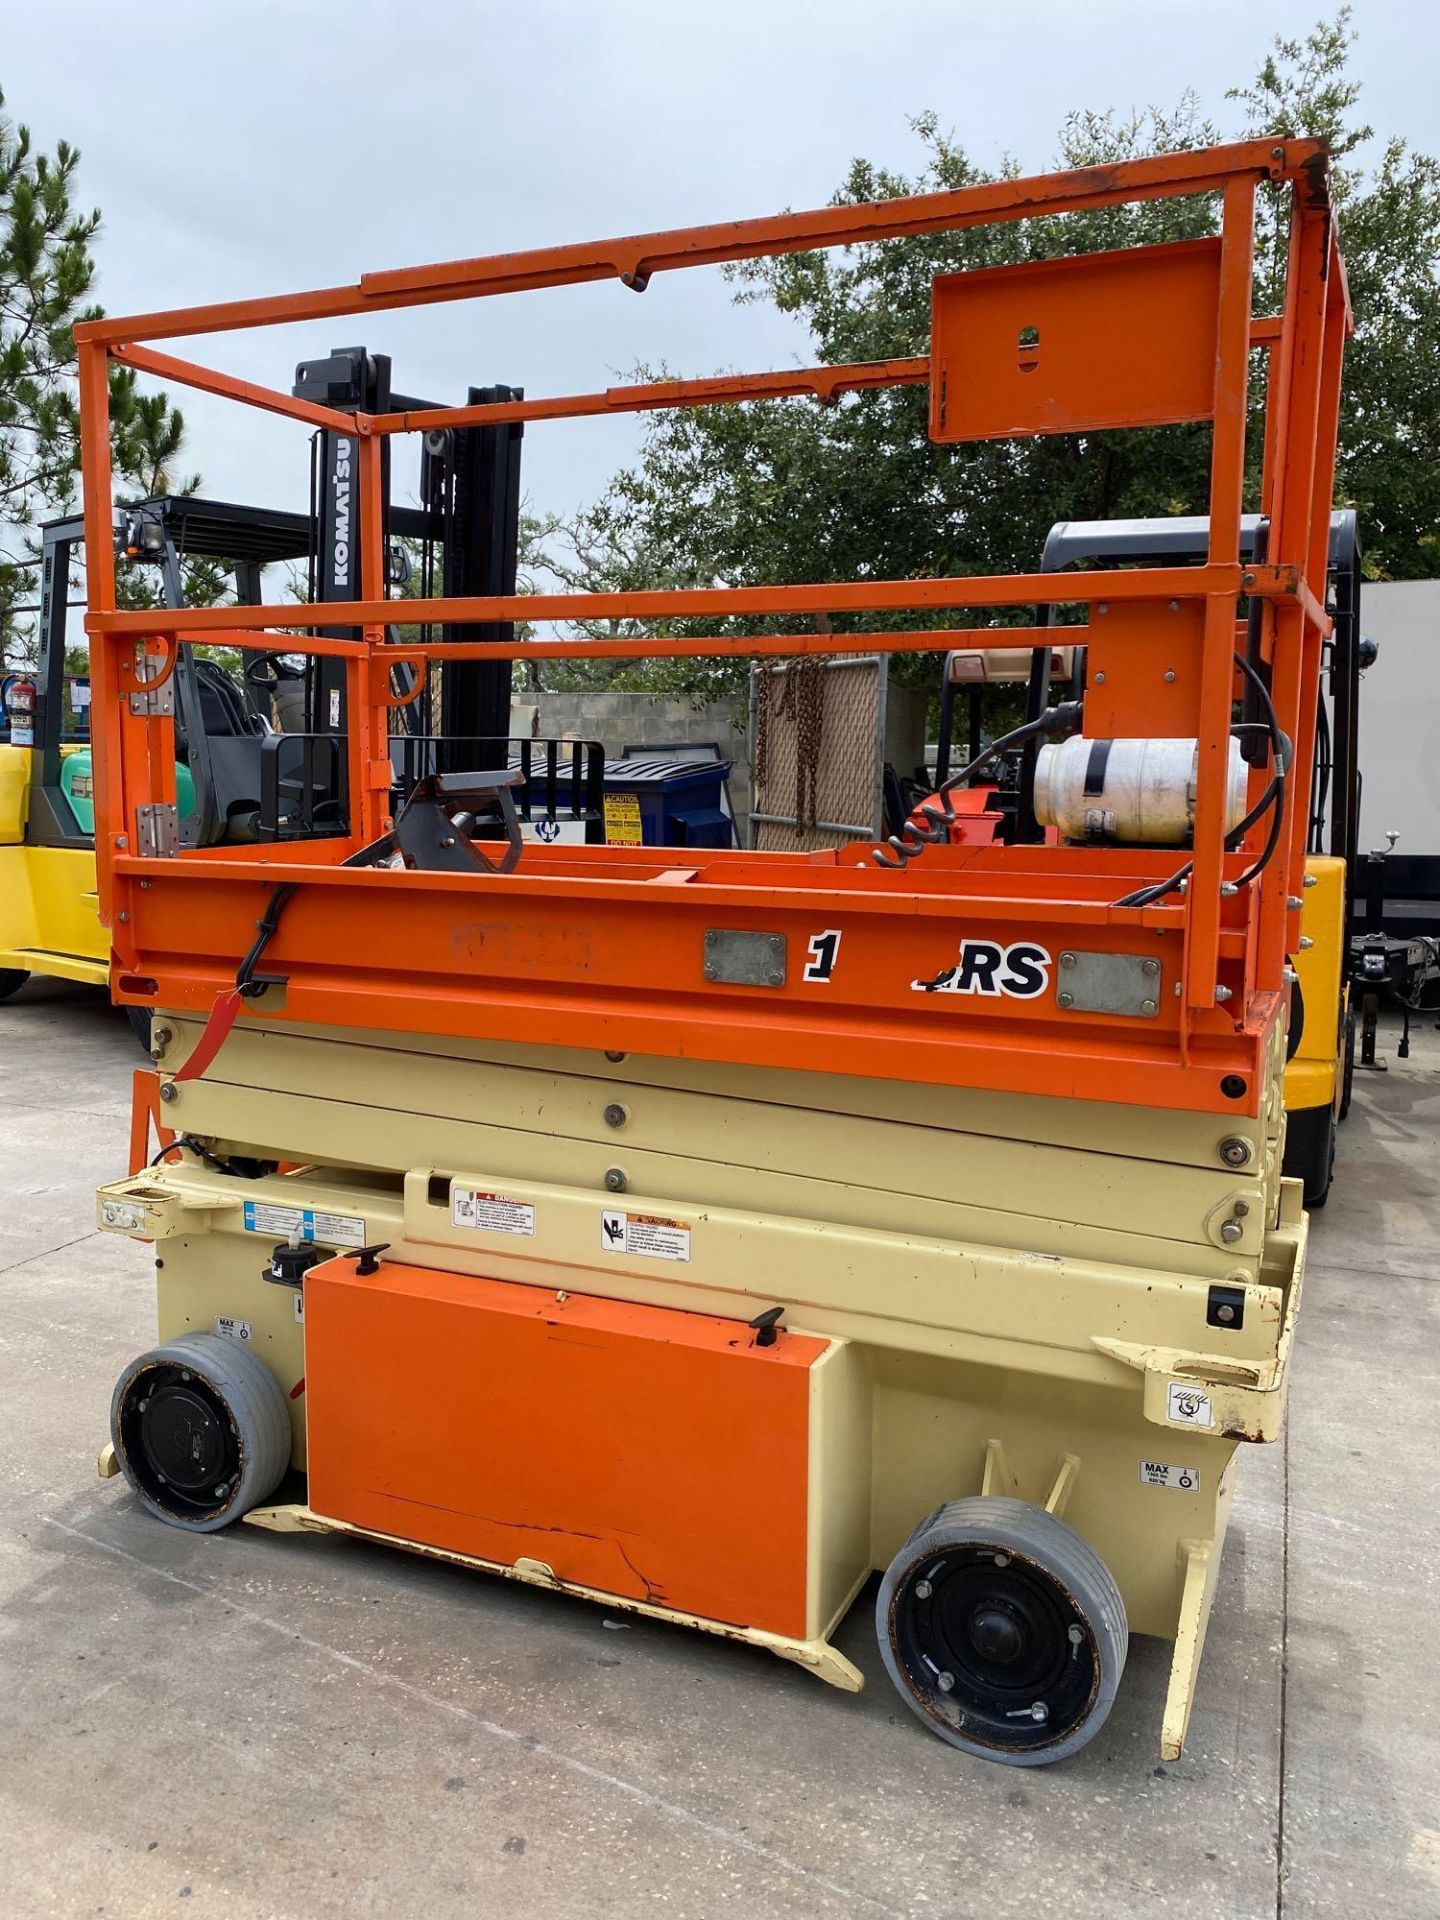 2015 JLG 1932RS ELECTRIC SCISSOR LIFT, SELF PROPELLED, 19' PLATFORM HEIGHTT, BUILT IN BATTERY CHARGE - Image 2 of 7